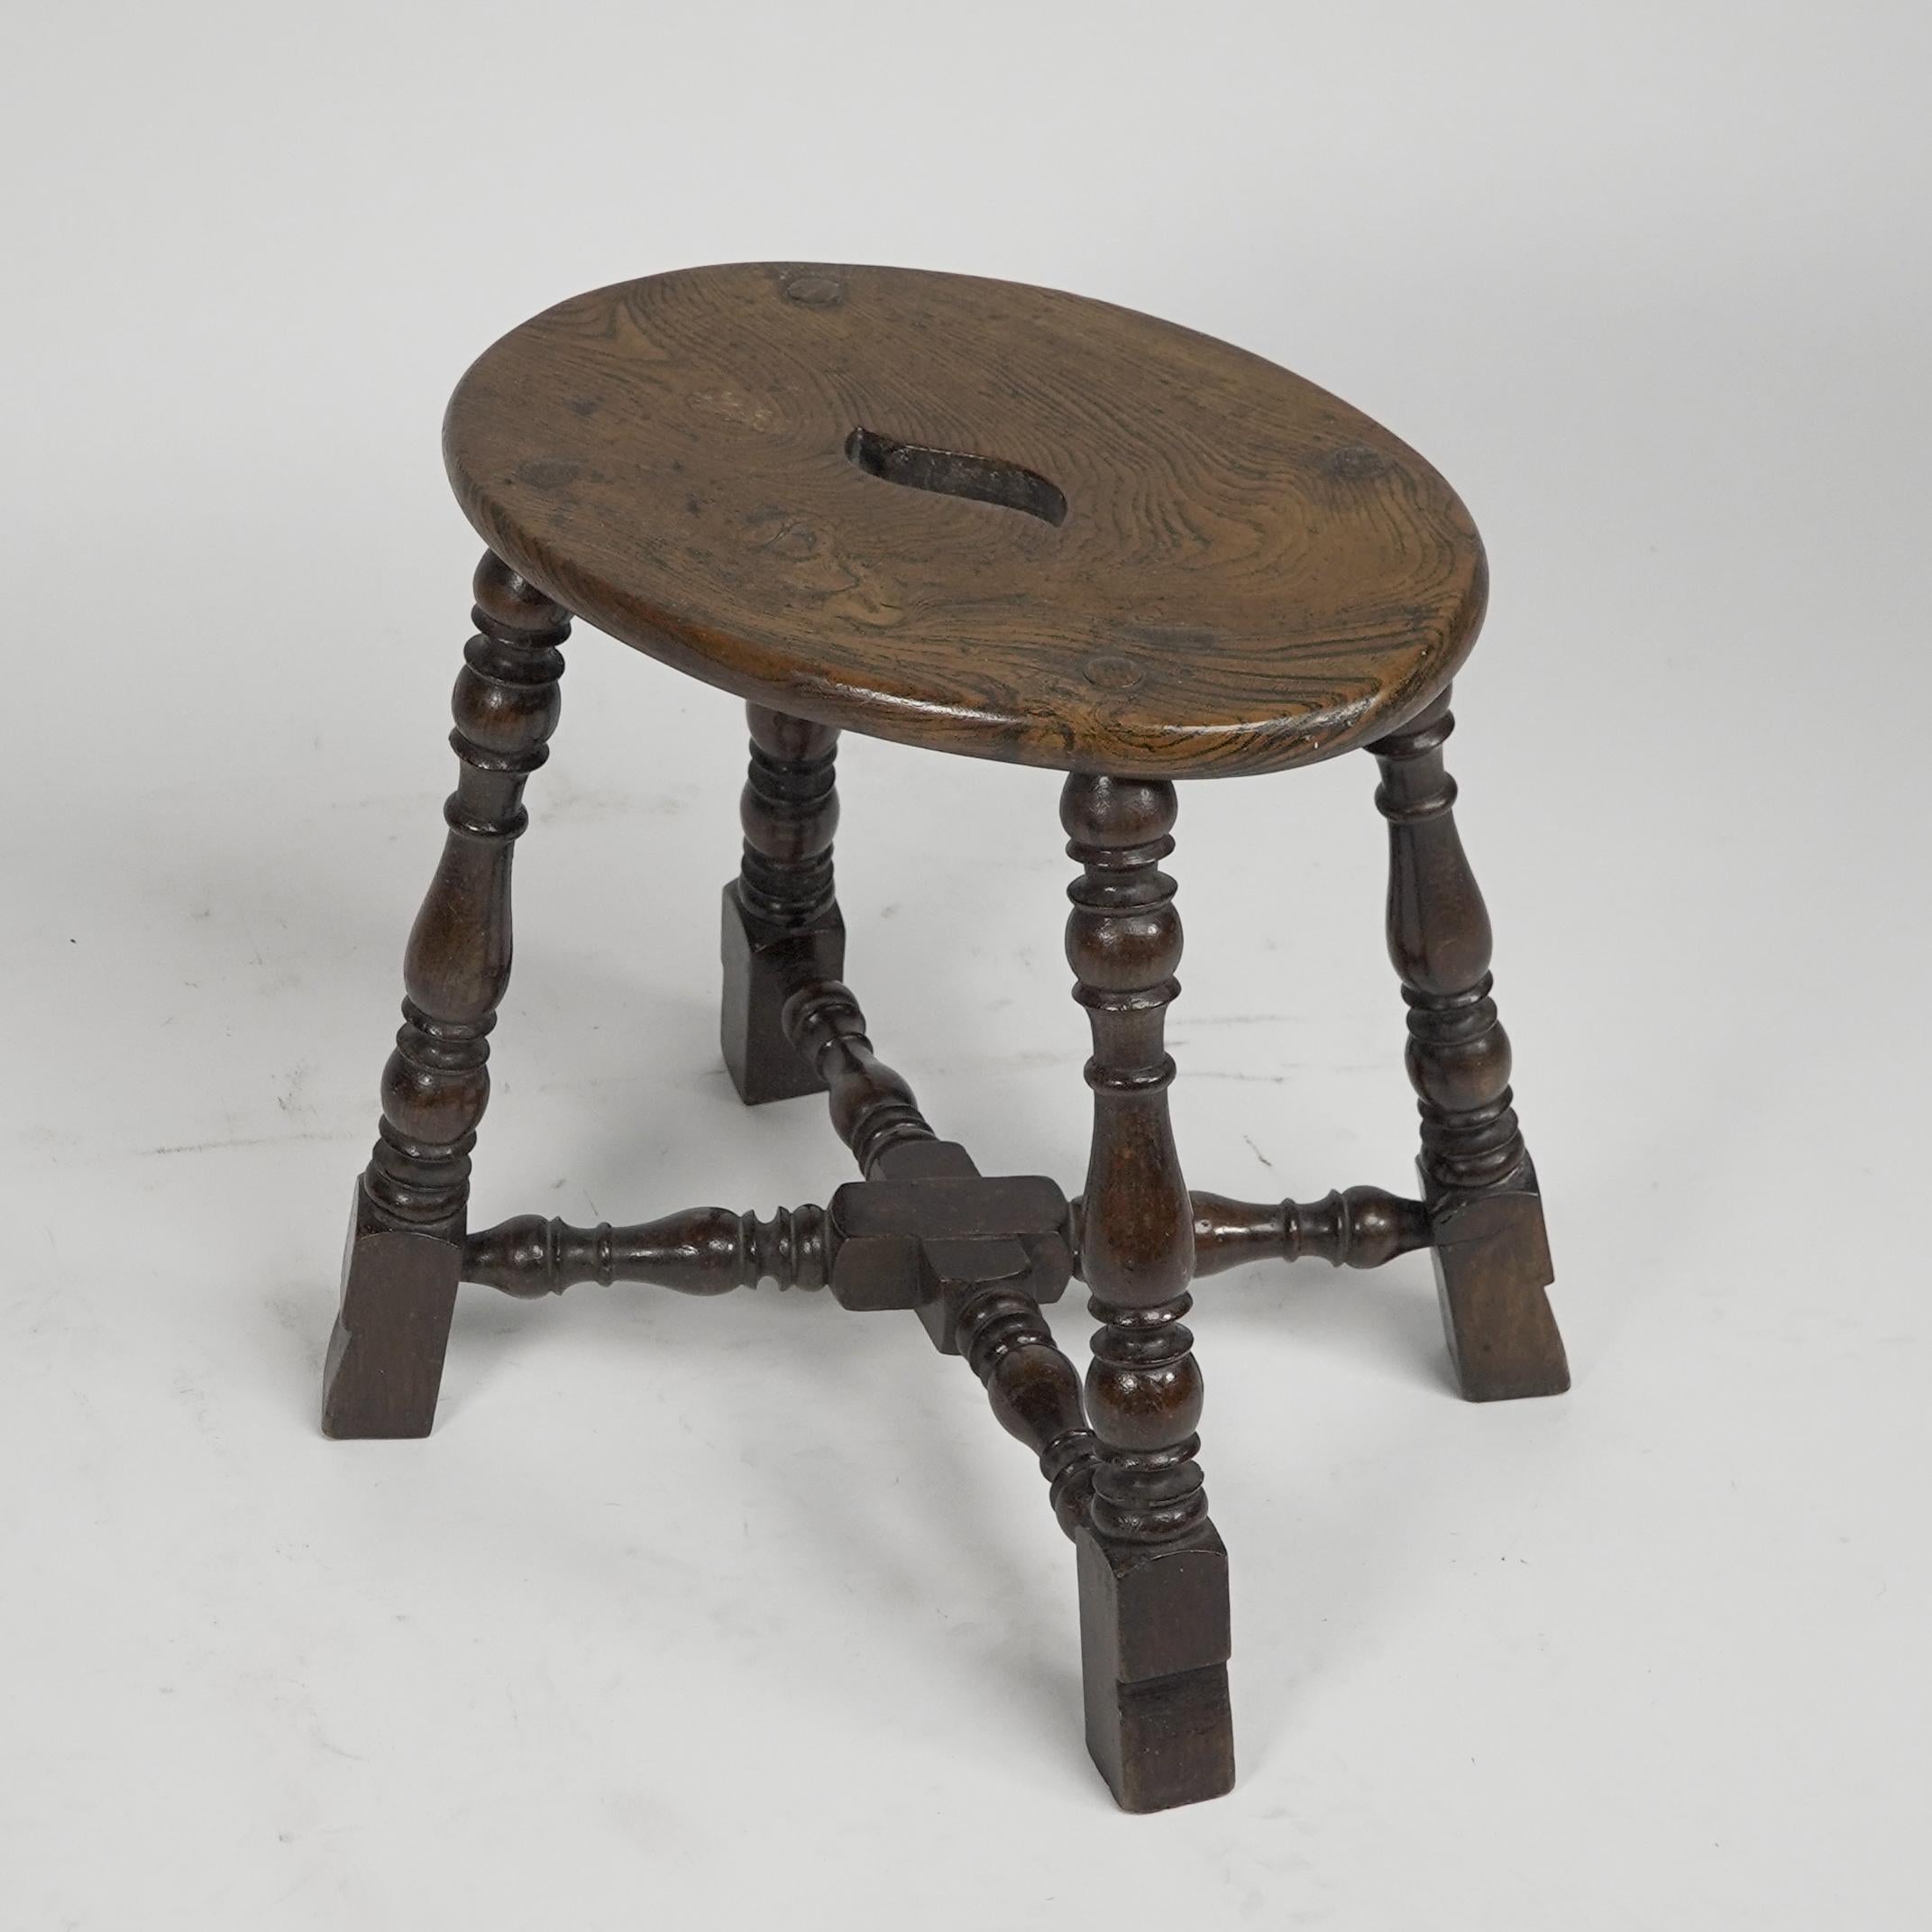 An Aesthetic Movement period Elm stool with a 'S' shaped pierced handle, and a wonderful wild grain to the seat. Tight through and exposed joints to the four corners of the seat with tiny little wedges hammered into those exposed circular tops. The